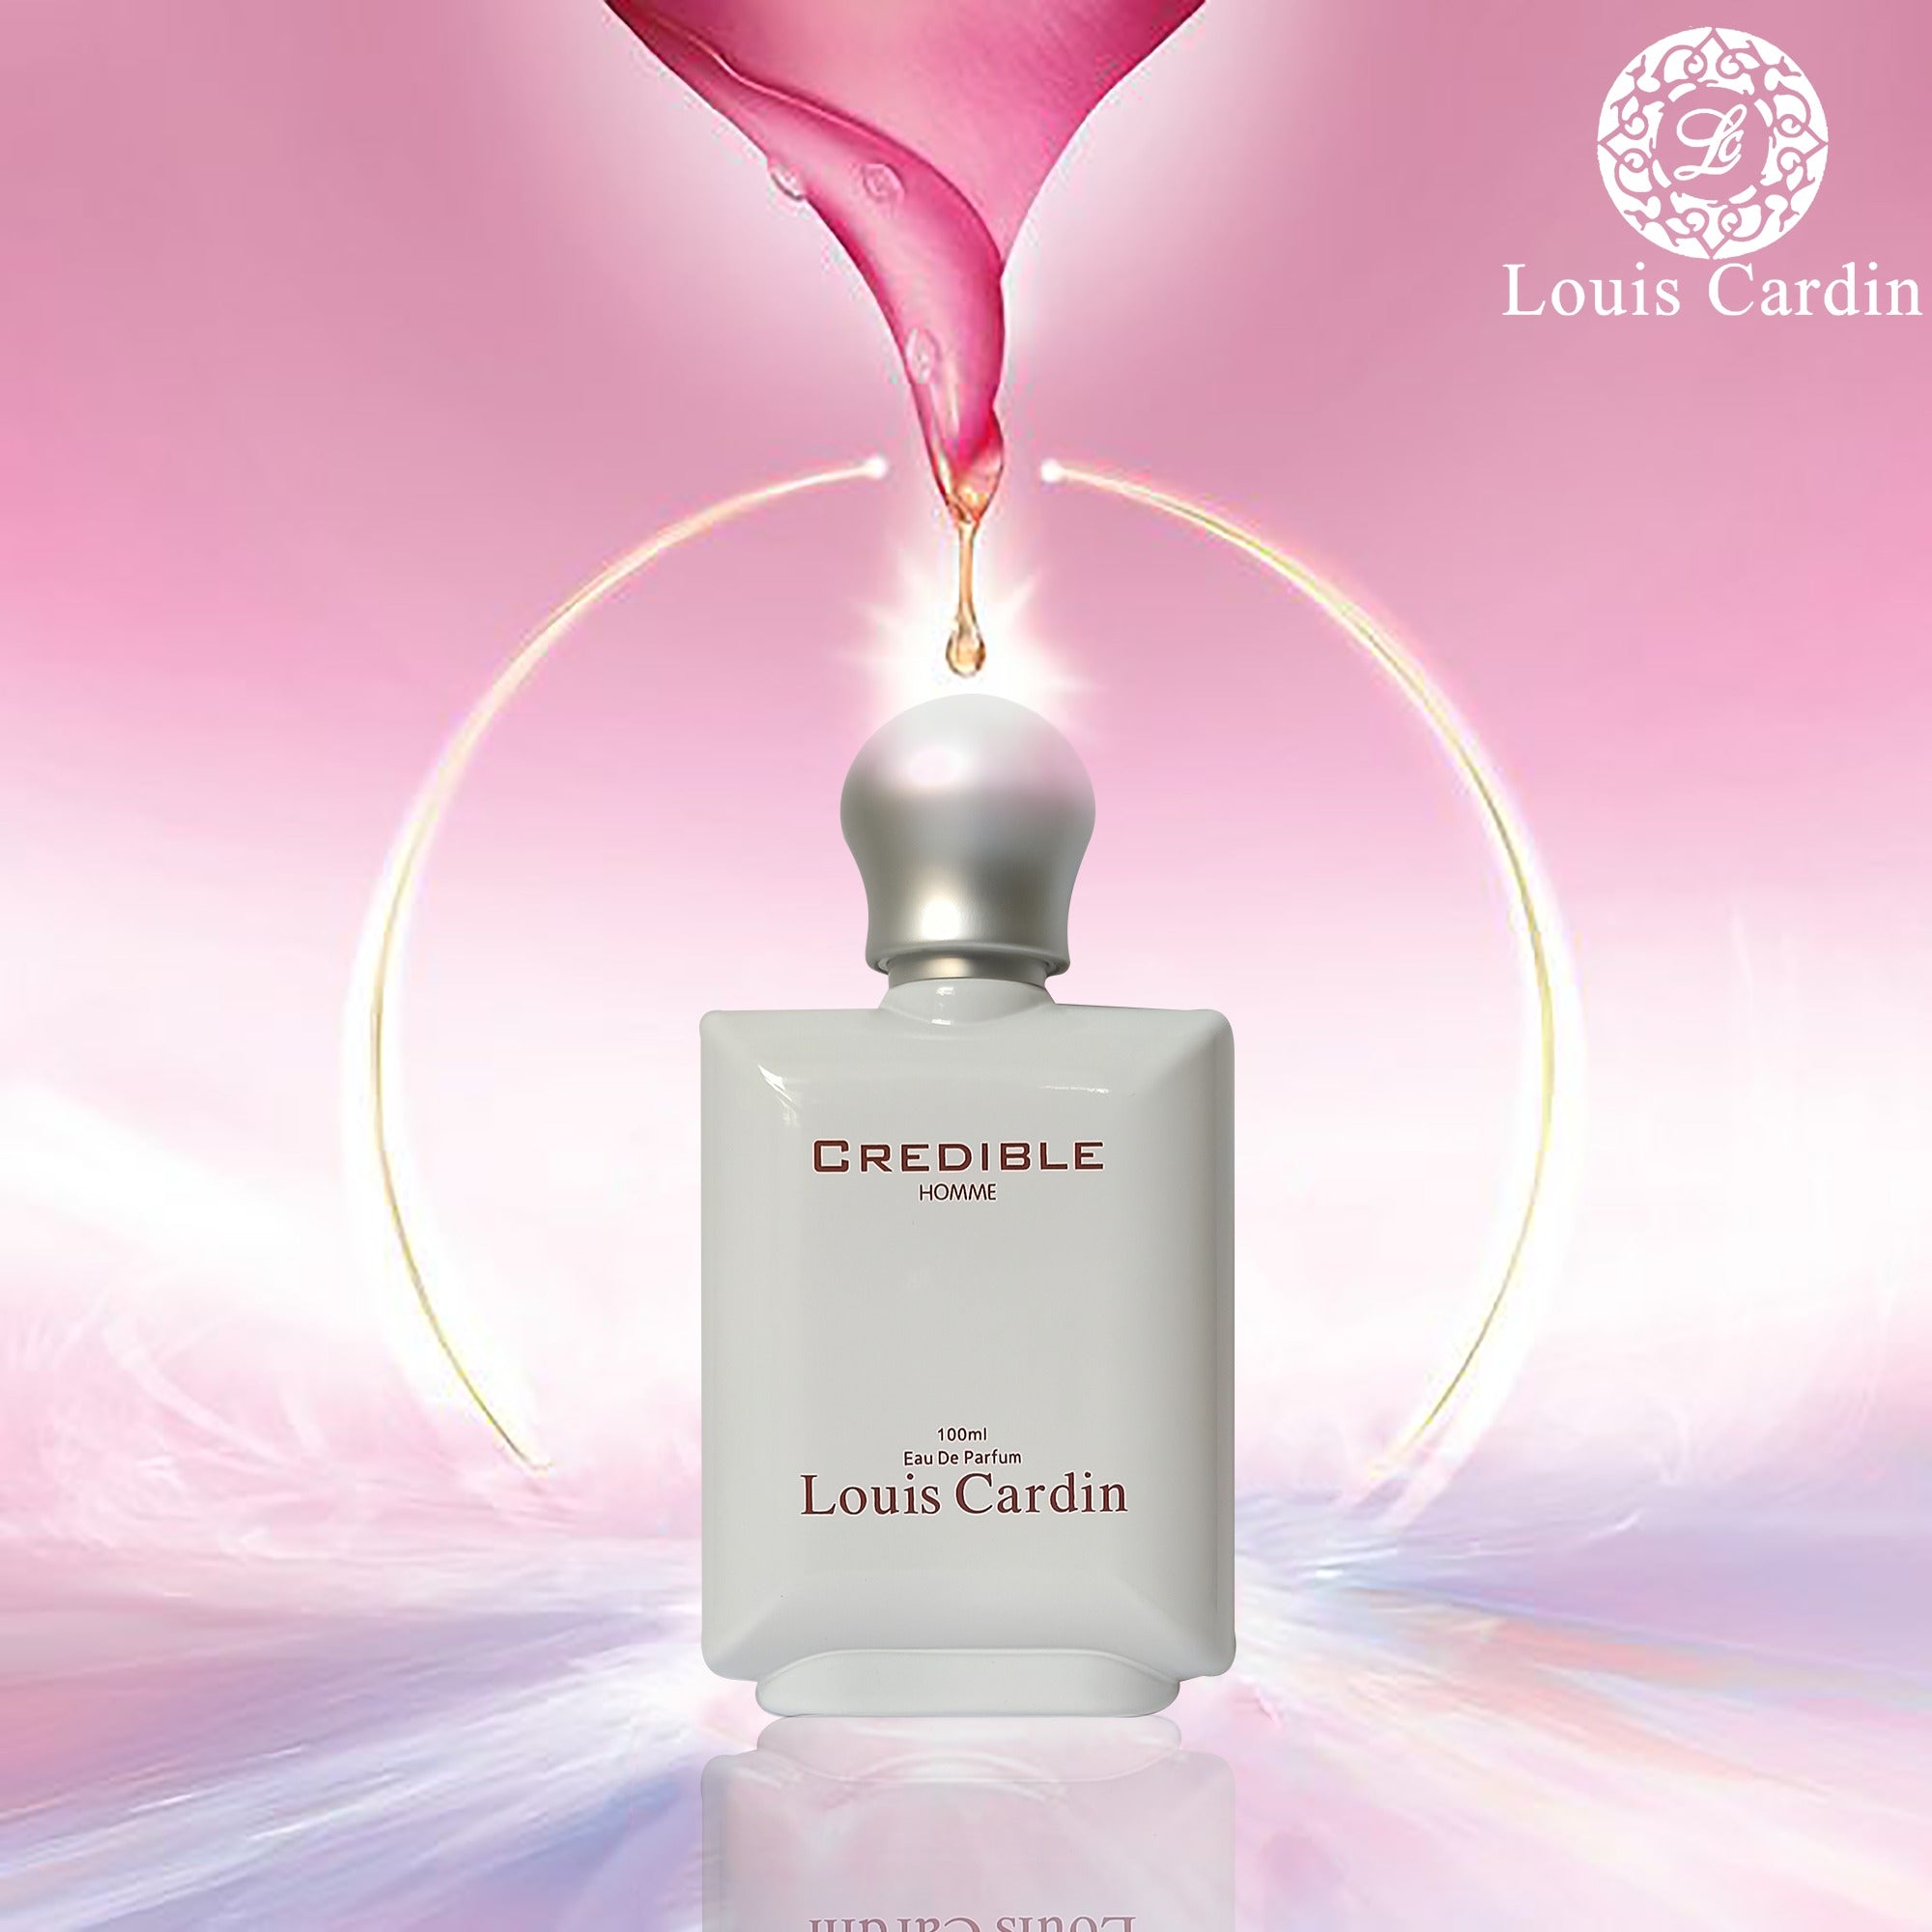 Louis Cardin Perfumes - Are you ready to plunge into the scent of